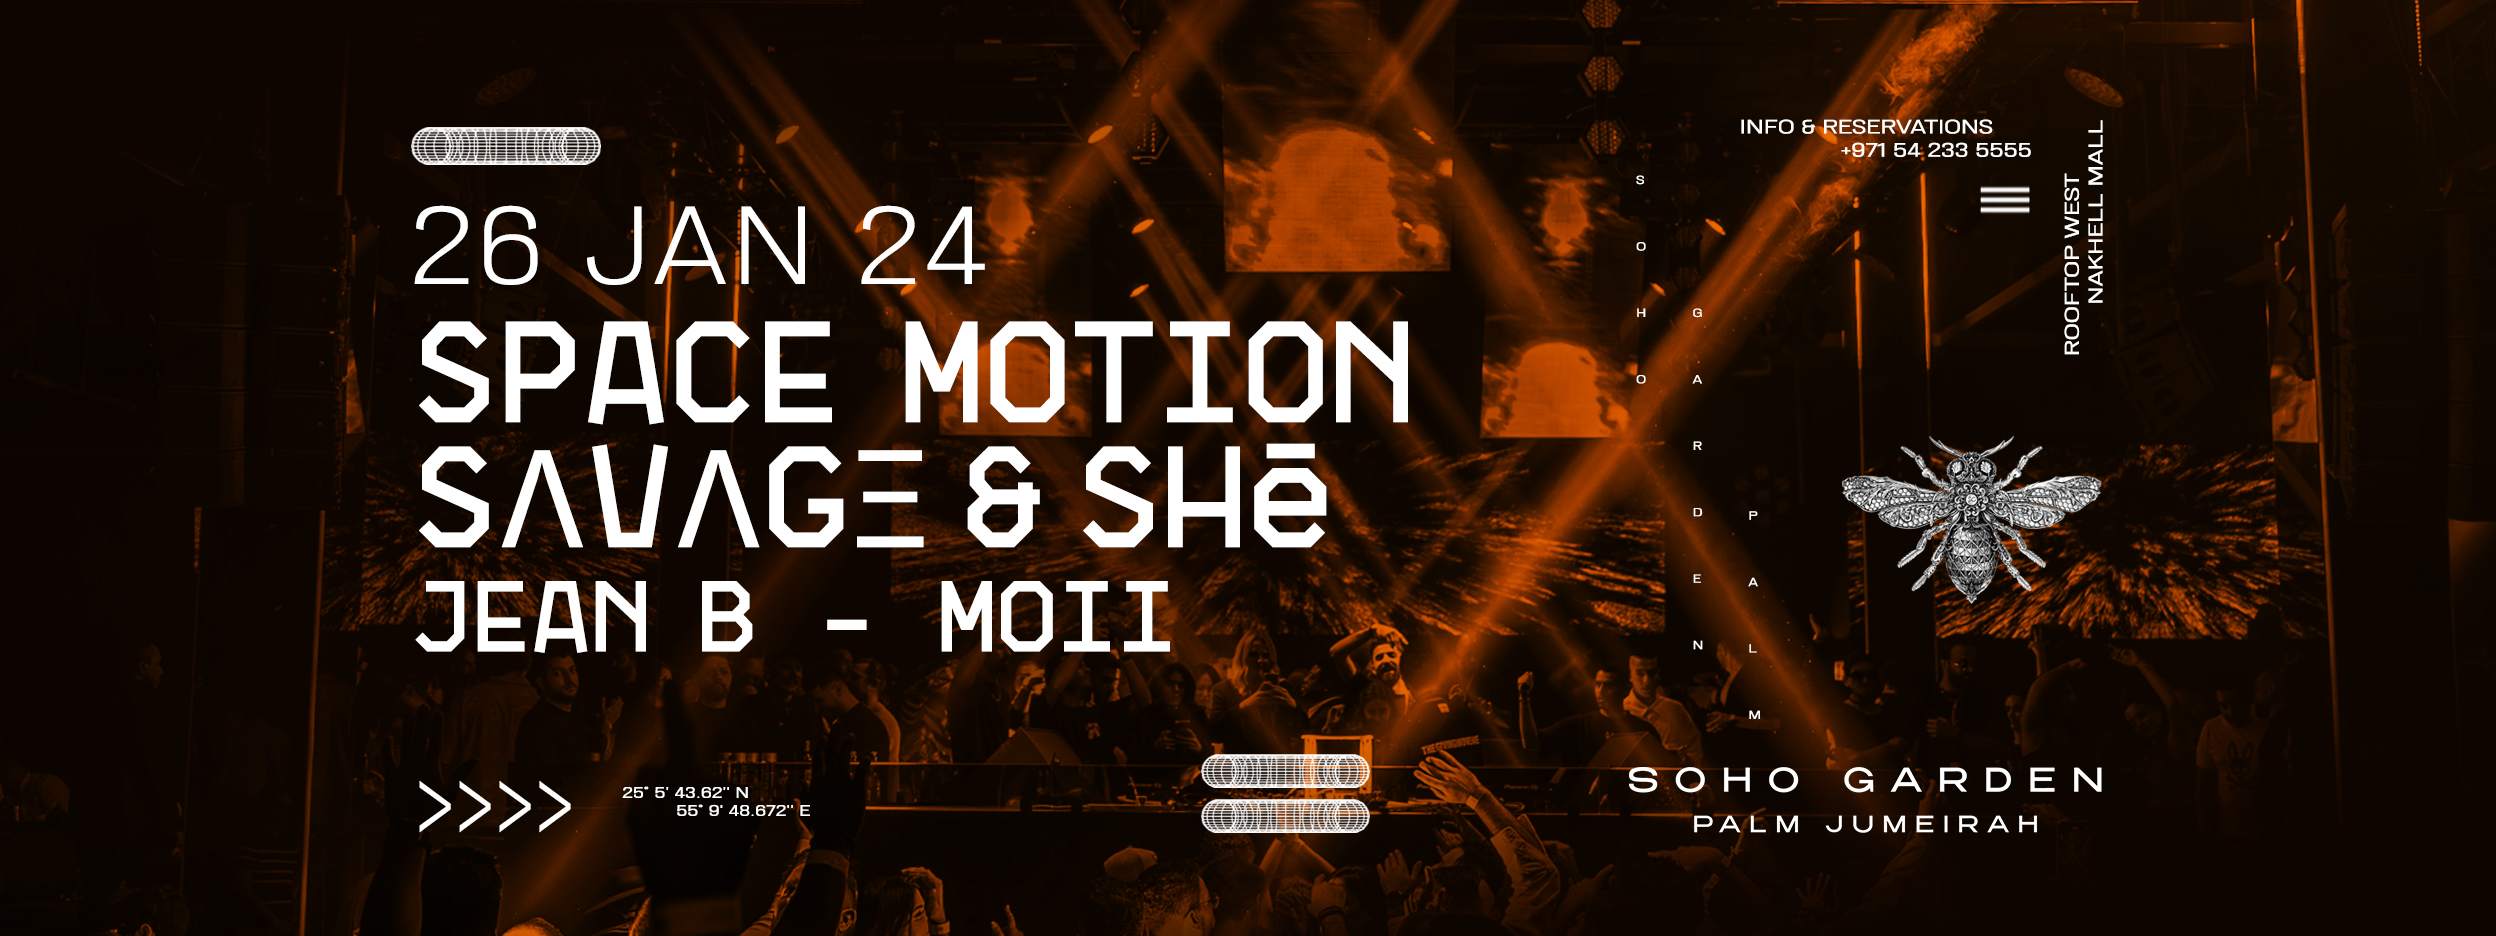 Space Motion and Savage & She - フライヤー表